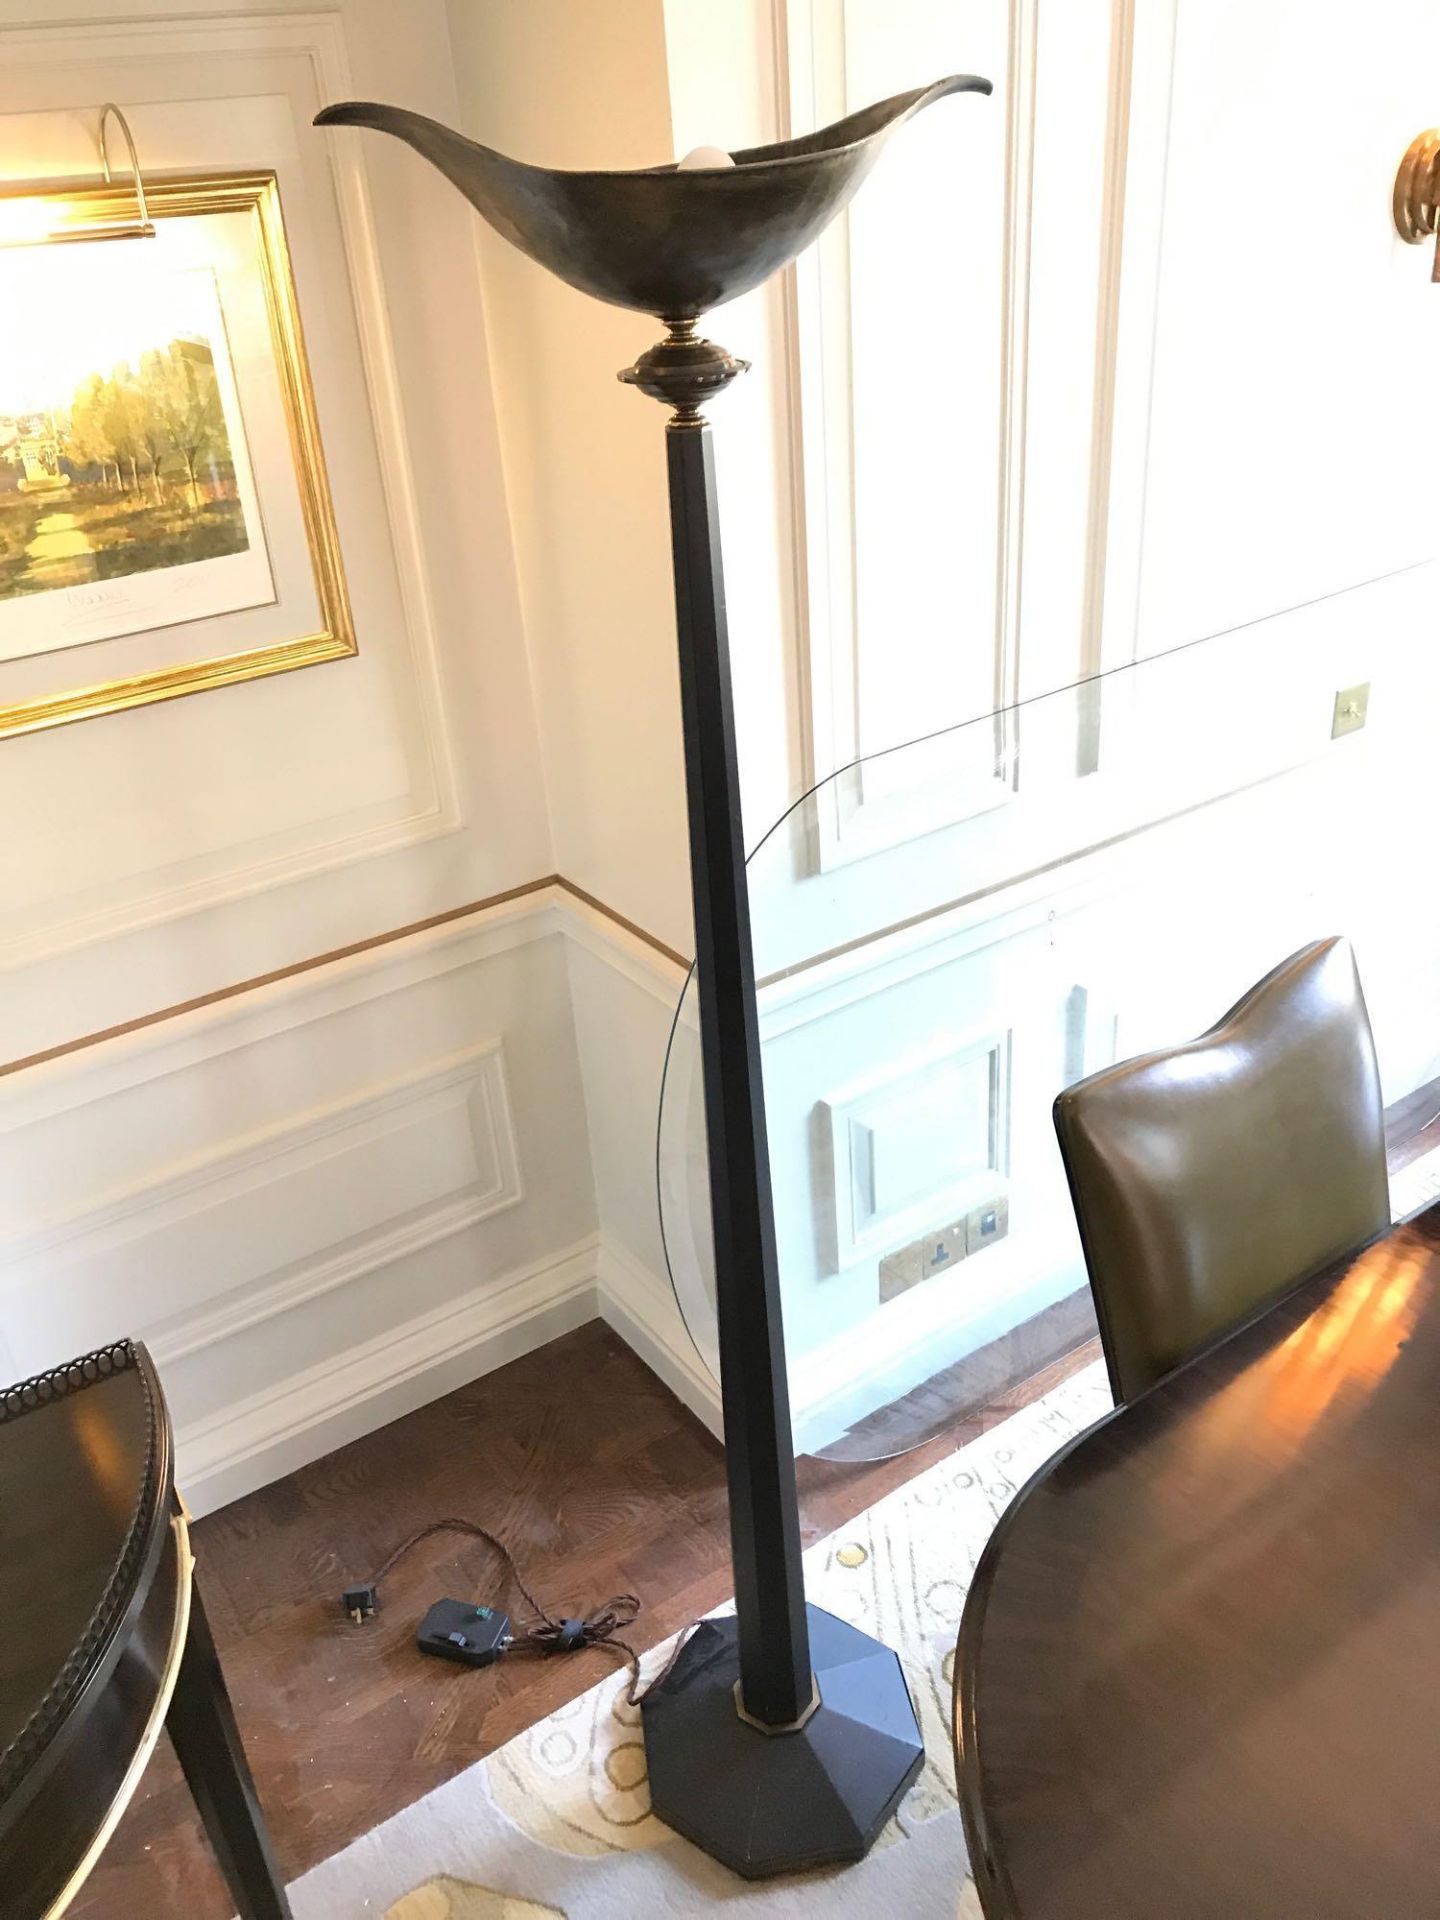 Heathfield And Co Torchiere Floor Lamp Black Column With Bowl Effect Metal Uplighter 173cm Room 617 - Image 2 of 2